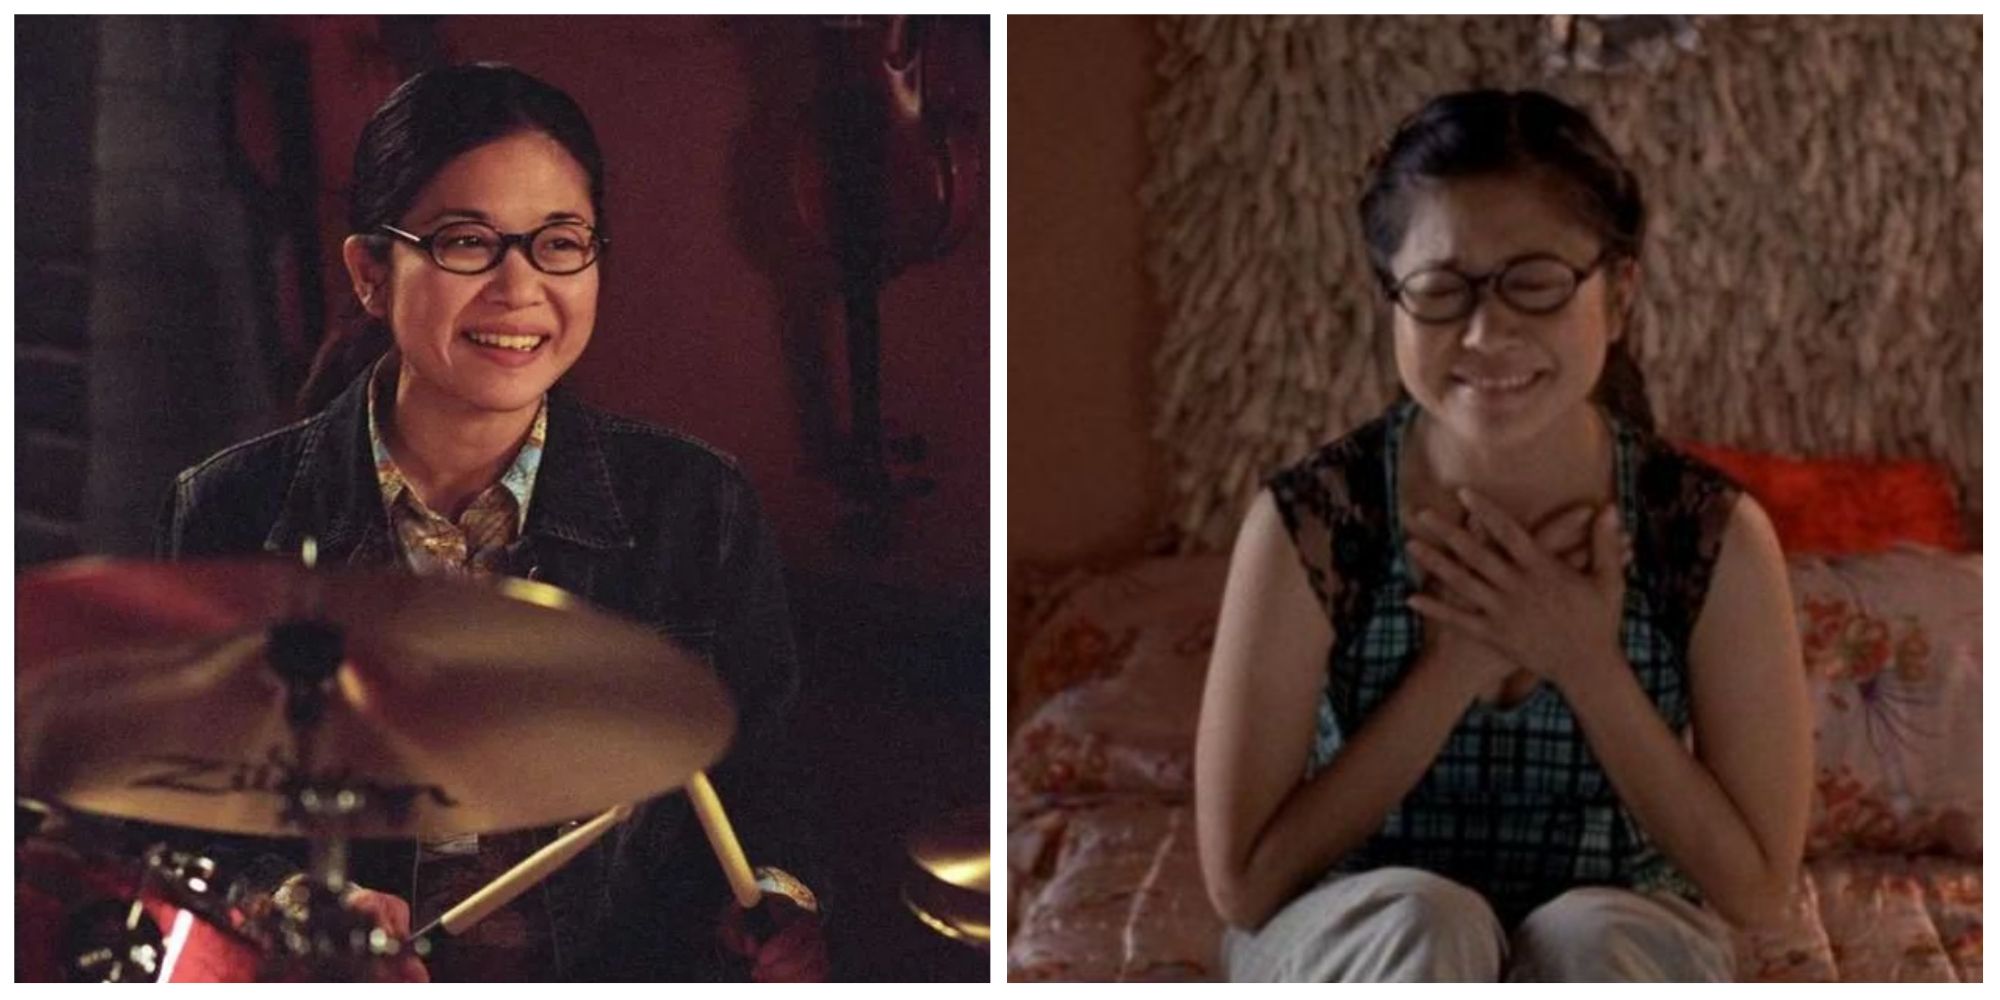 Left: Lane playing the drums and smiling. Right: Lane sat on her bed with her hands over her chest looking upset.